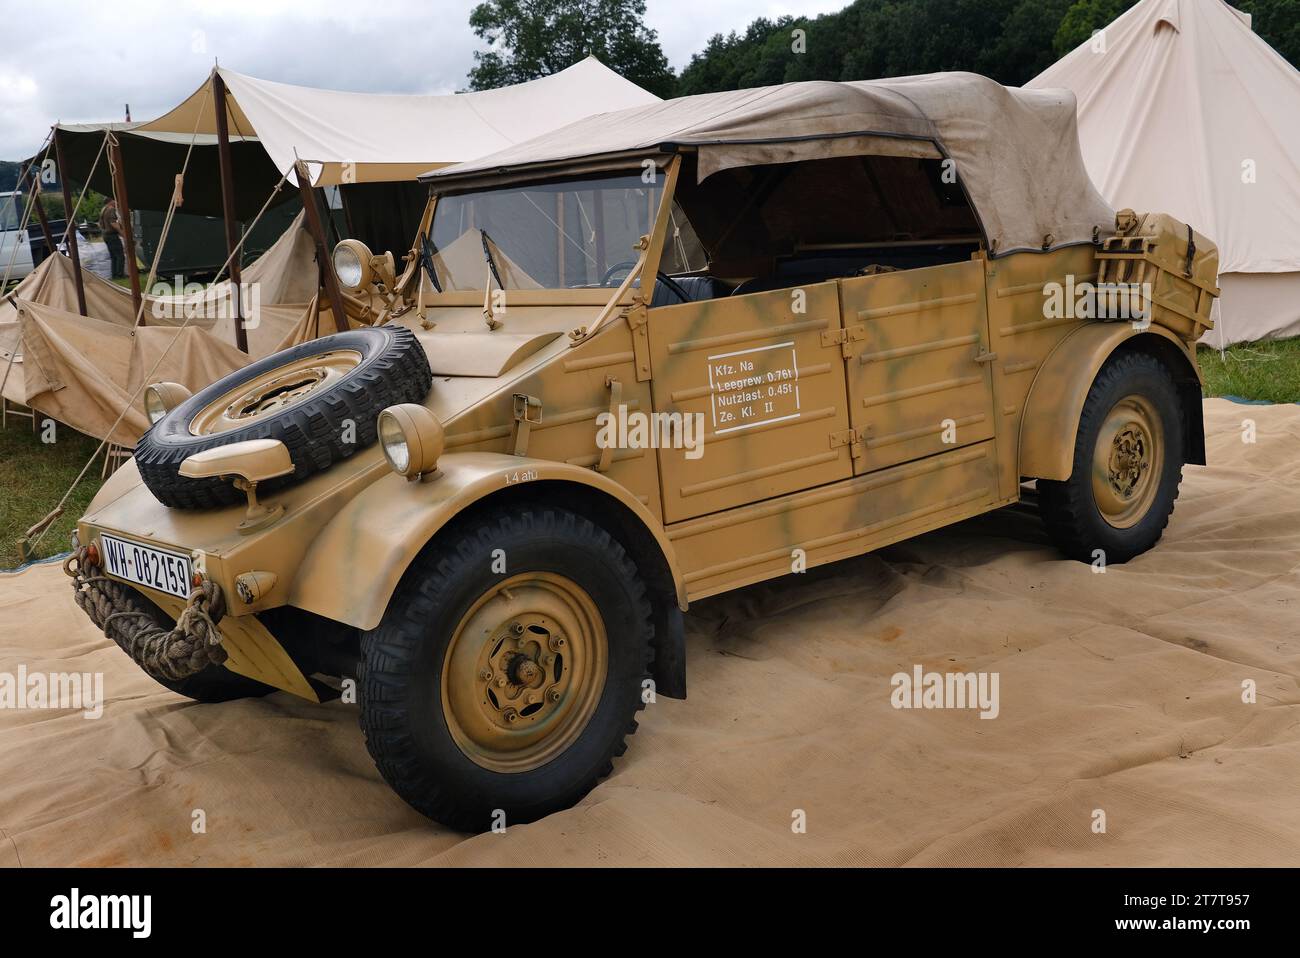 The Kübelwagen's role as a light multi-purpose military vehicle made it the German equivalent to the Allied Willys MB 'jeep' and the GAZ-67, Stock Photo